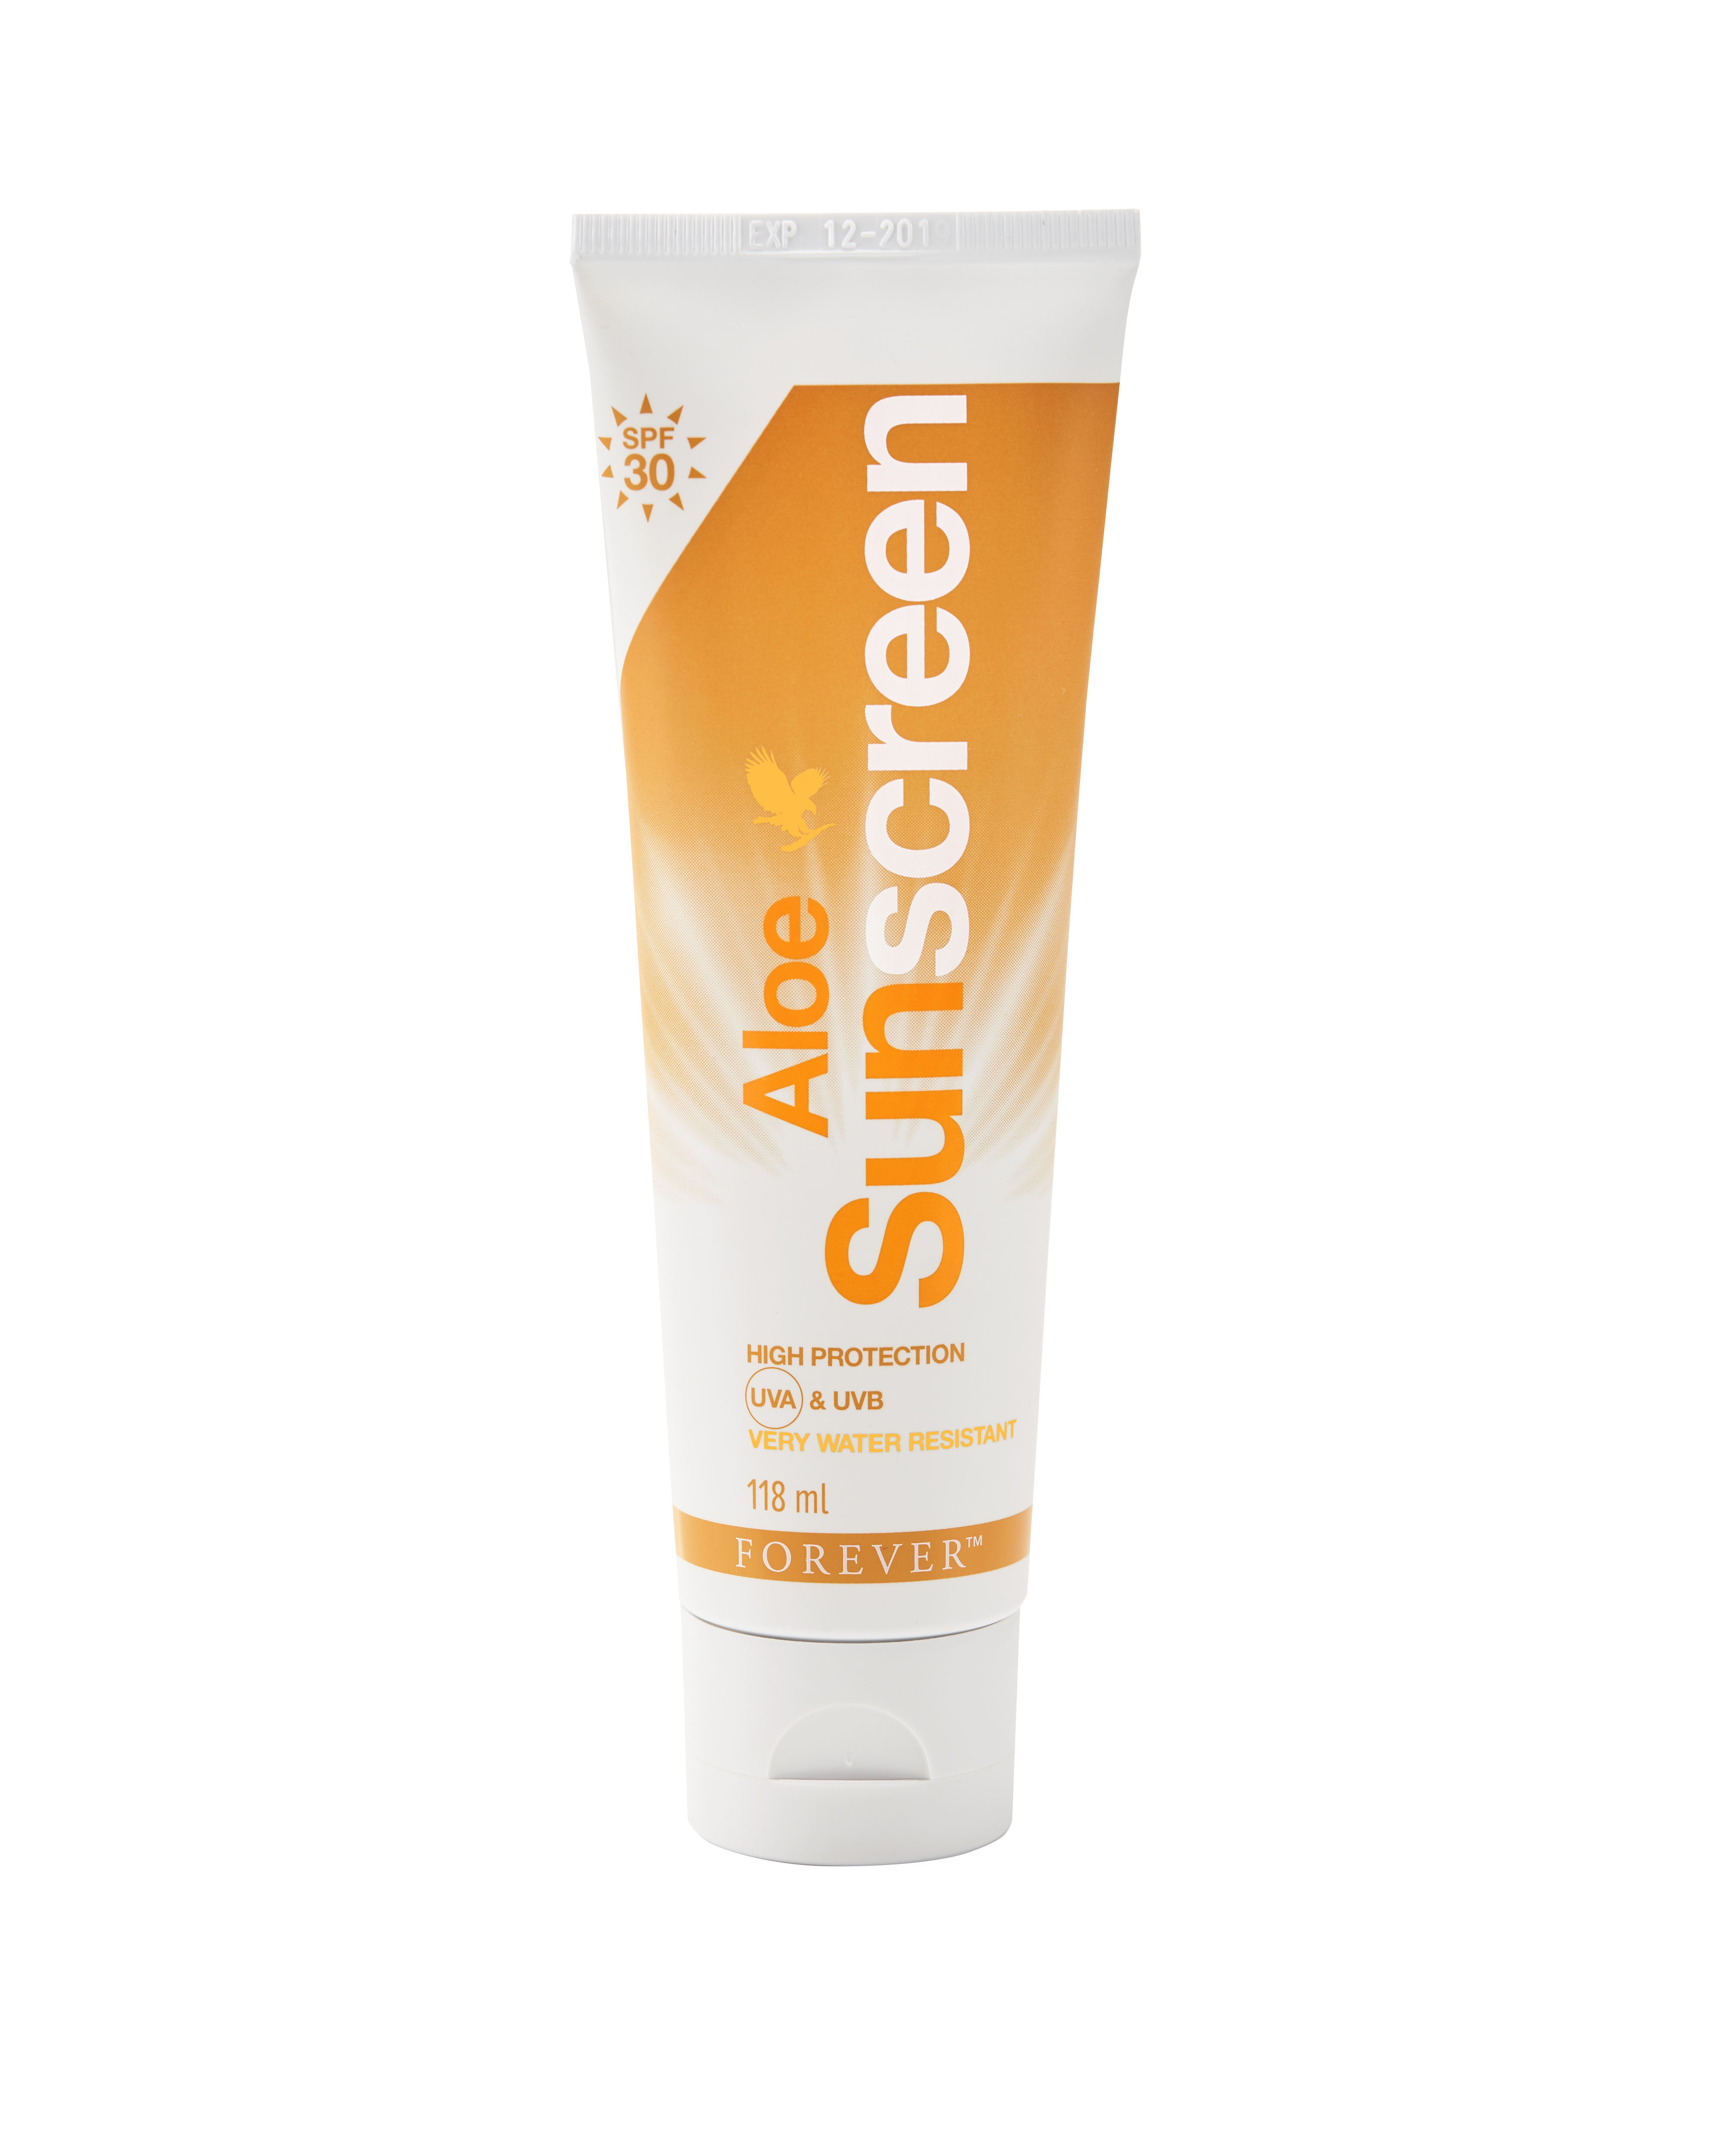 Aloe Sunscreen lets you soak in the sun without harmful rays wreaking havoc on your skin. This water-resistant formula offers SPF 30 broad spectrum protection against UVA and UVB rays while locking in moisture with soothing inner leaf aloe. Powerful and gentle, Aloe Sunscreen will keep the whole family protected, wherever the adventure leads.​